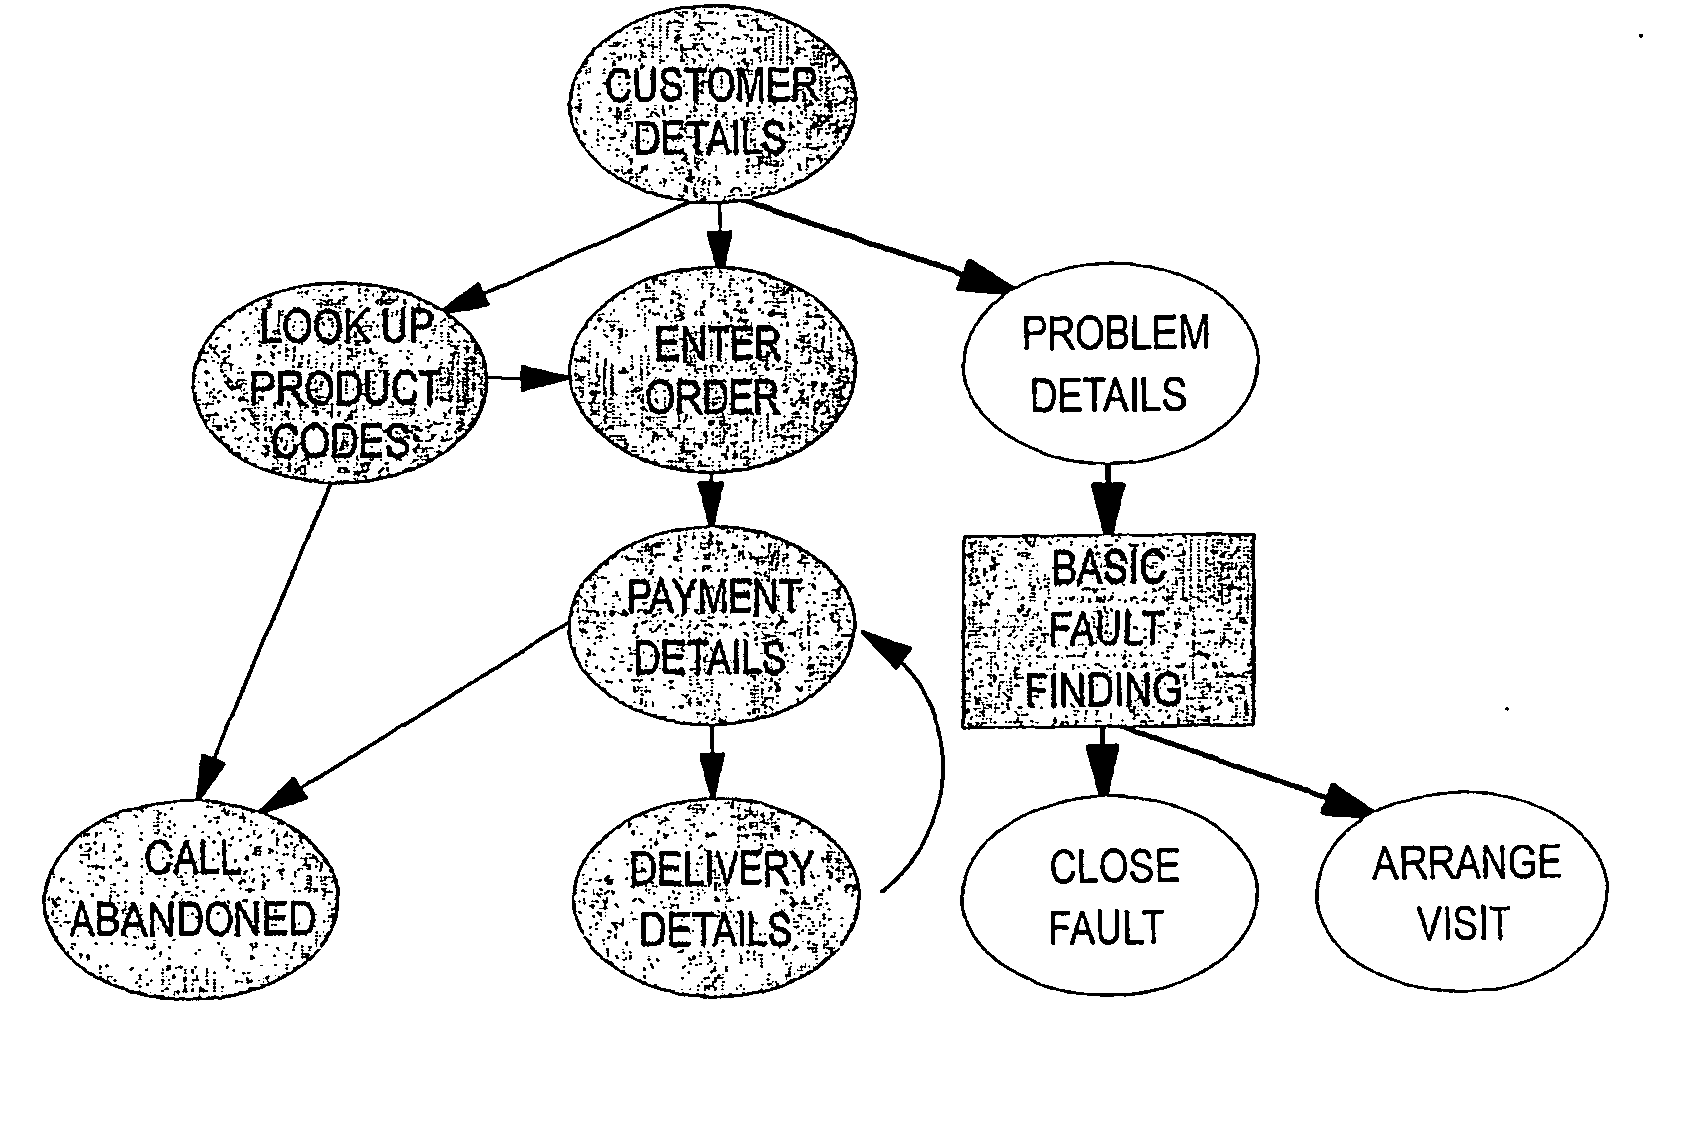 System and Method for Analysing Communications Streams